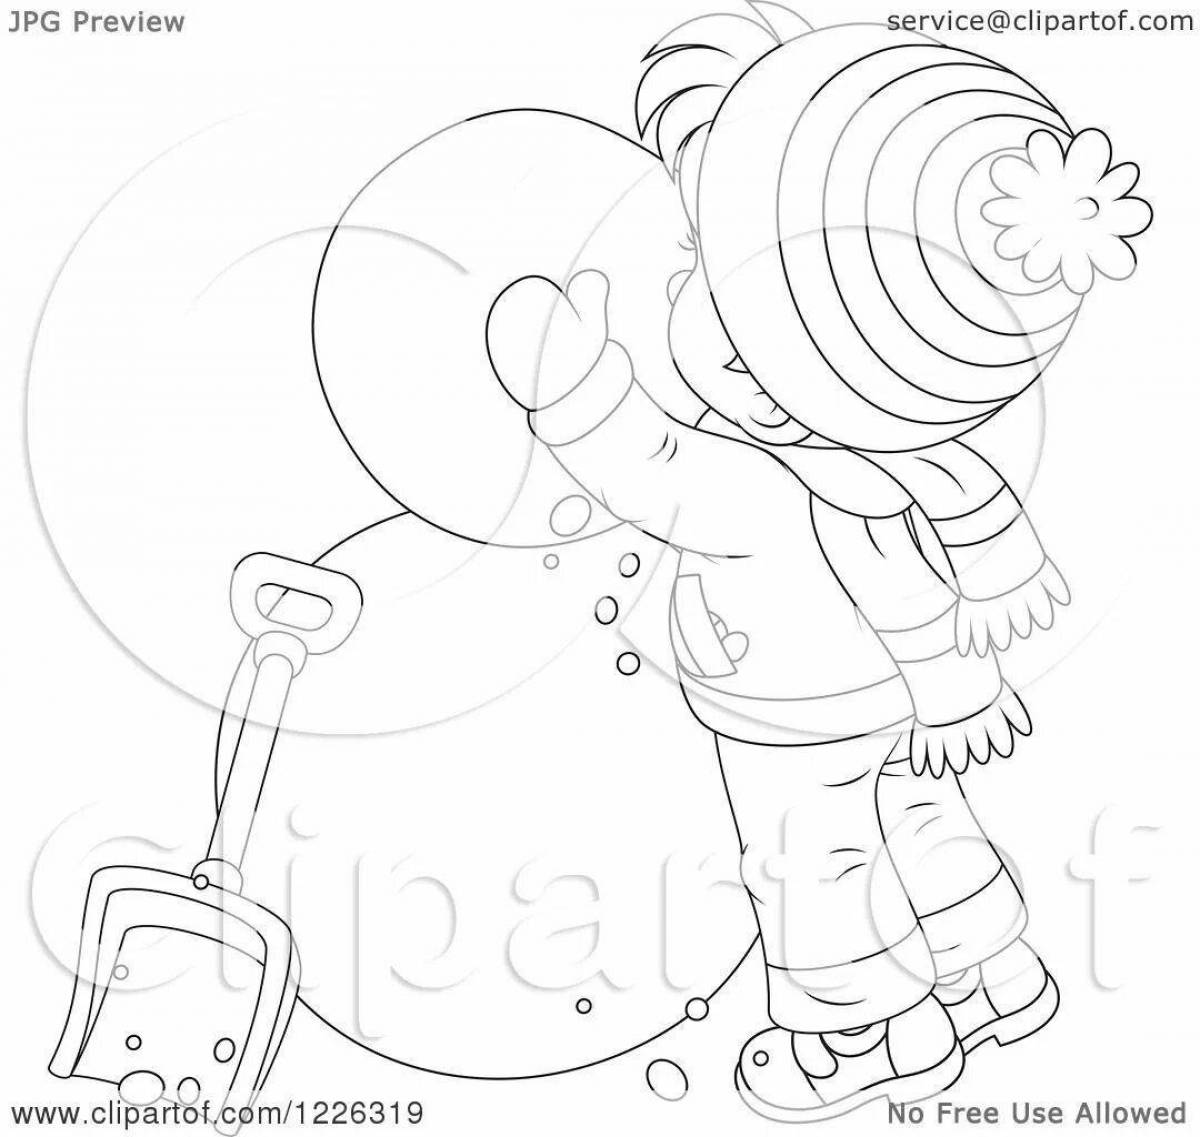 Coloring-imagination coloring page com